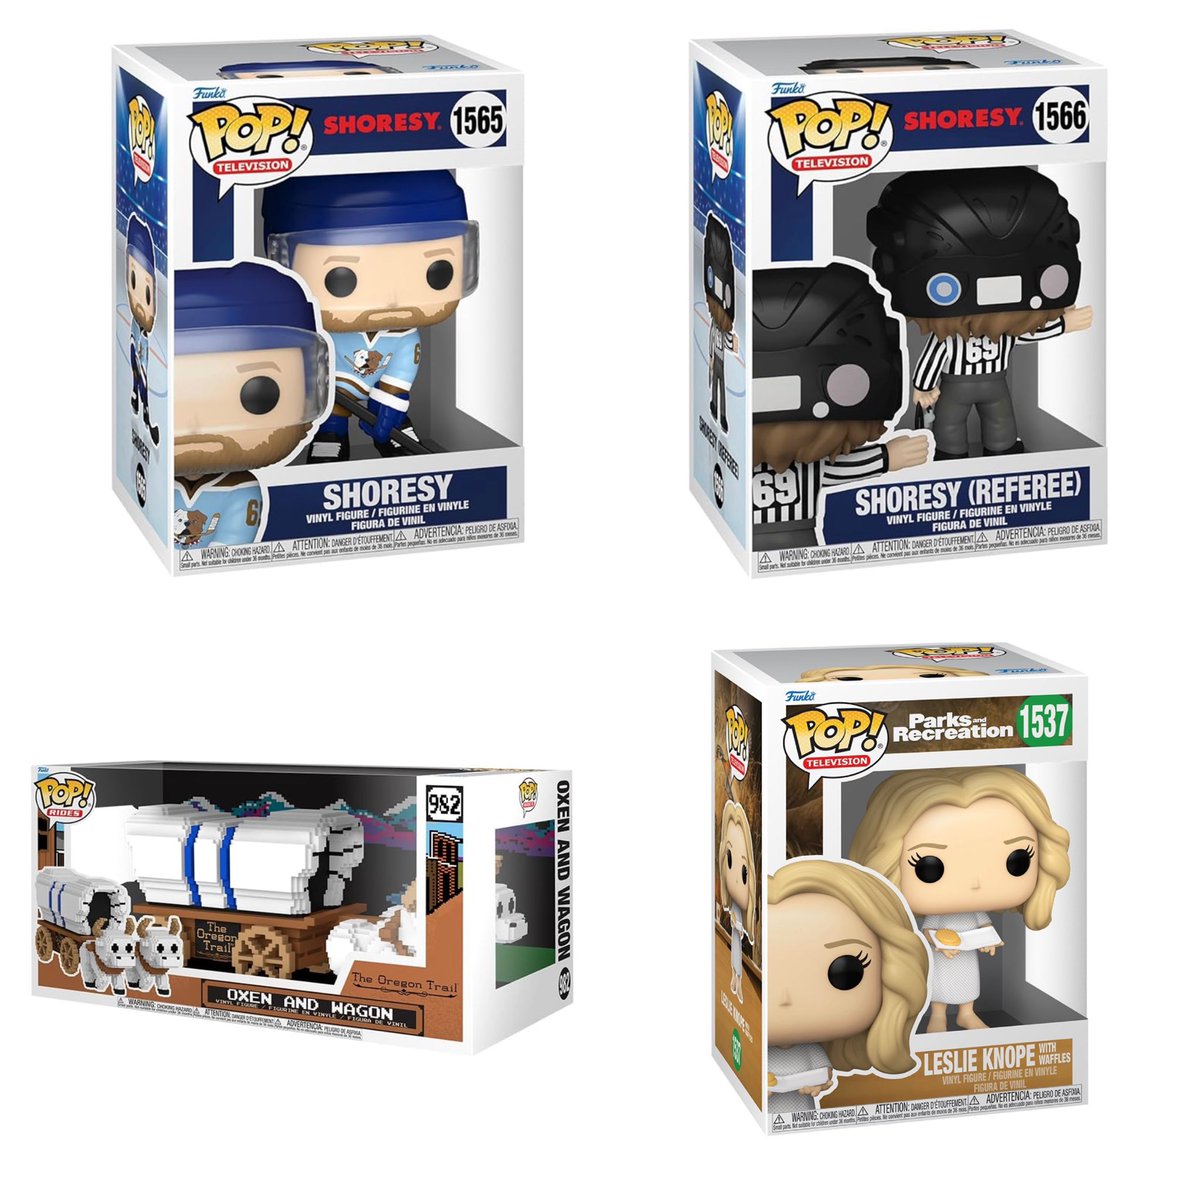 Shoresy, Oregon Trail and Parks and Rec Pops now available to preorder on Amazon! #funko #shoresy #parksandrec #oregontrail #ad

amzn.to/3UKBNz0